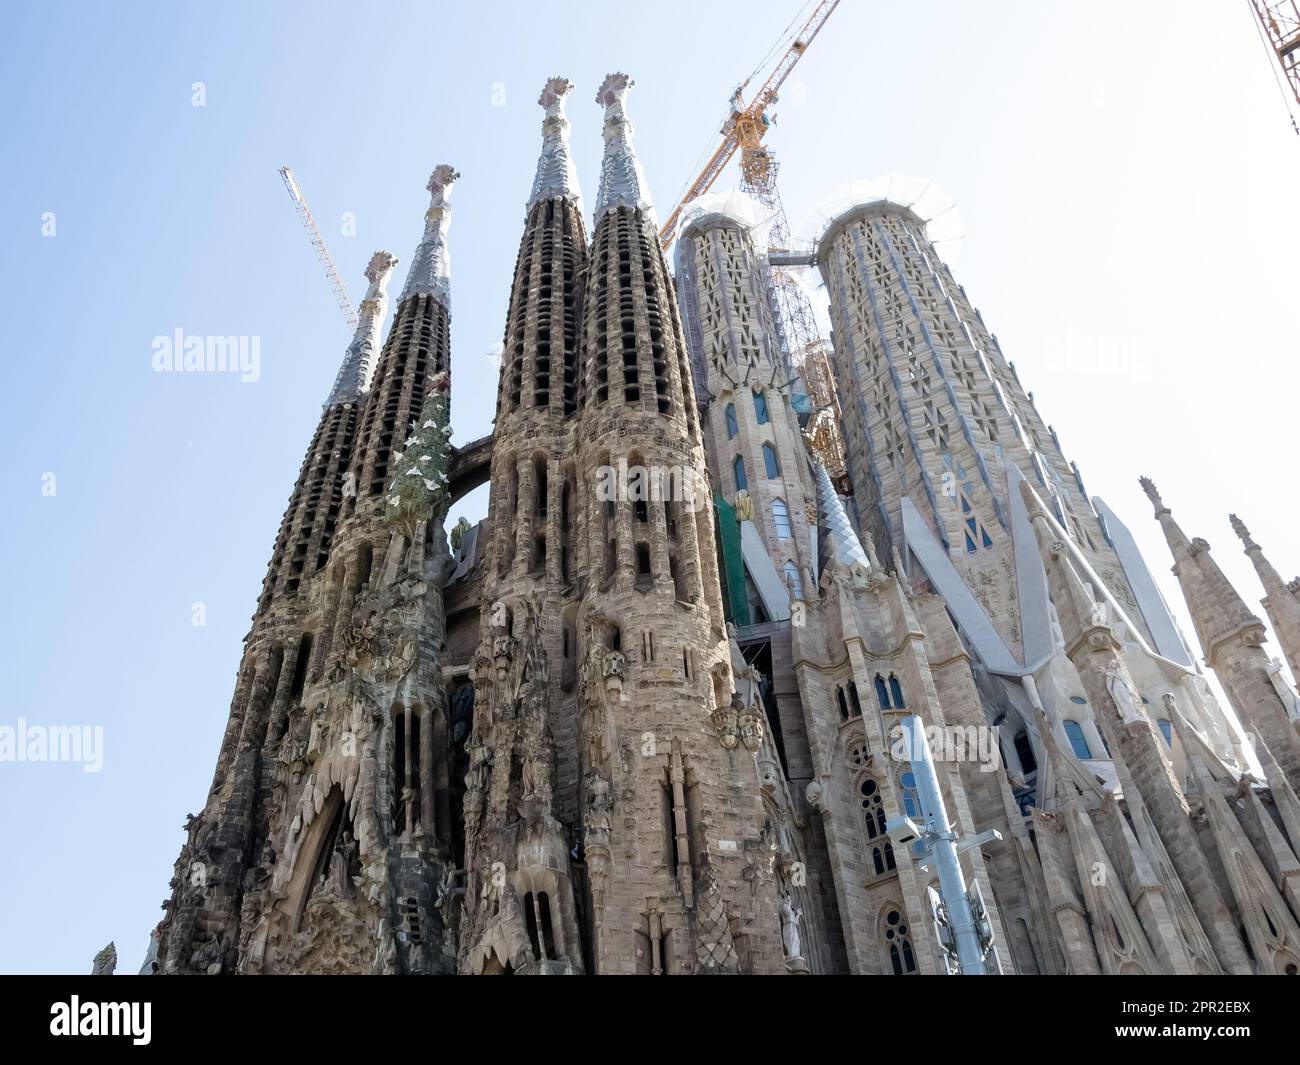 Architectural detail of Sagrada Família, the world's largest unfinished ...